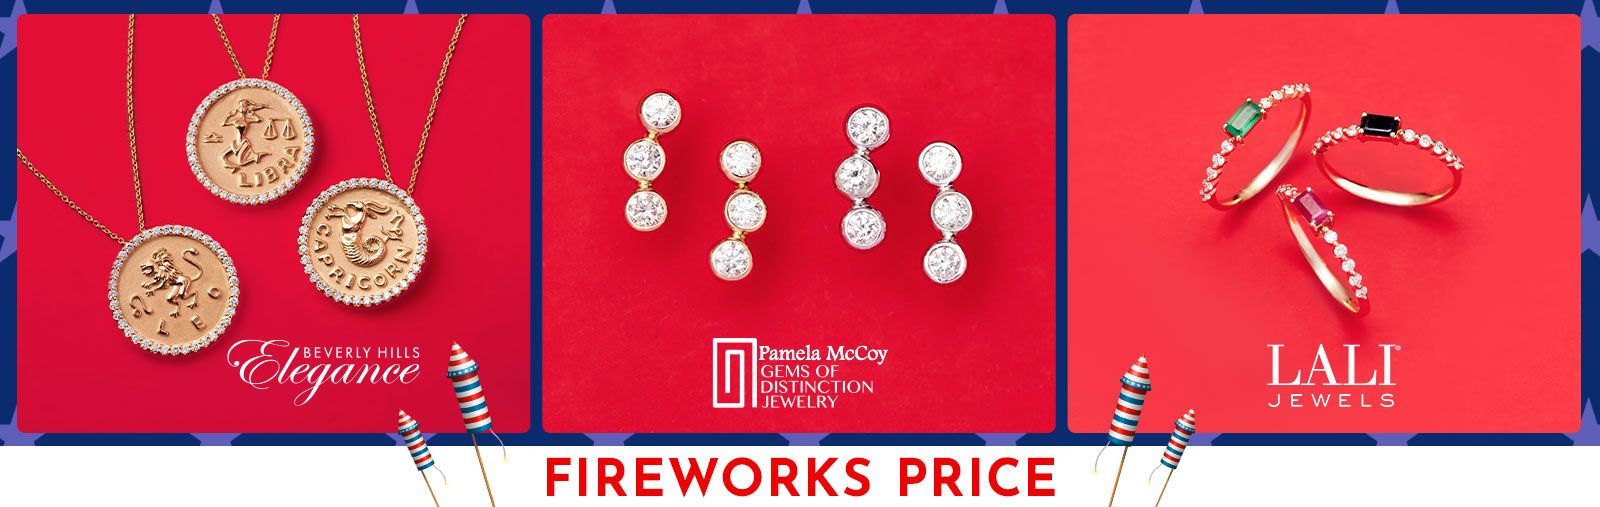 Extra 20% Off Orders $99+ Use Code: FREEDOM20 Cue the Sparklers, It's Time to Celebrate with Fireworks, Freedom & Fantastic Deals  197-863, 194-772 & 203-776